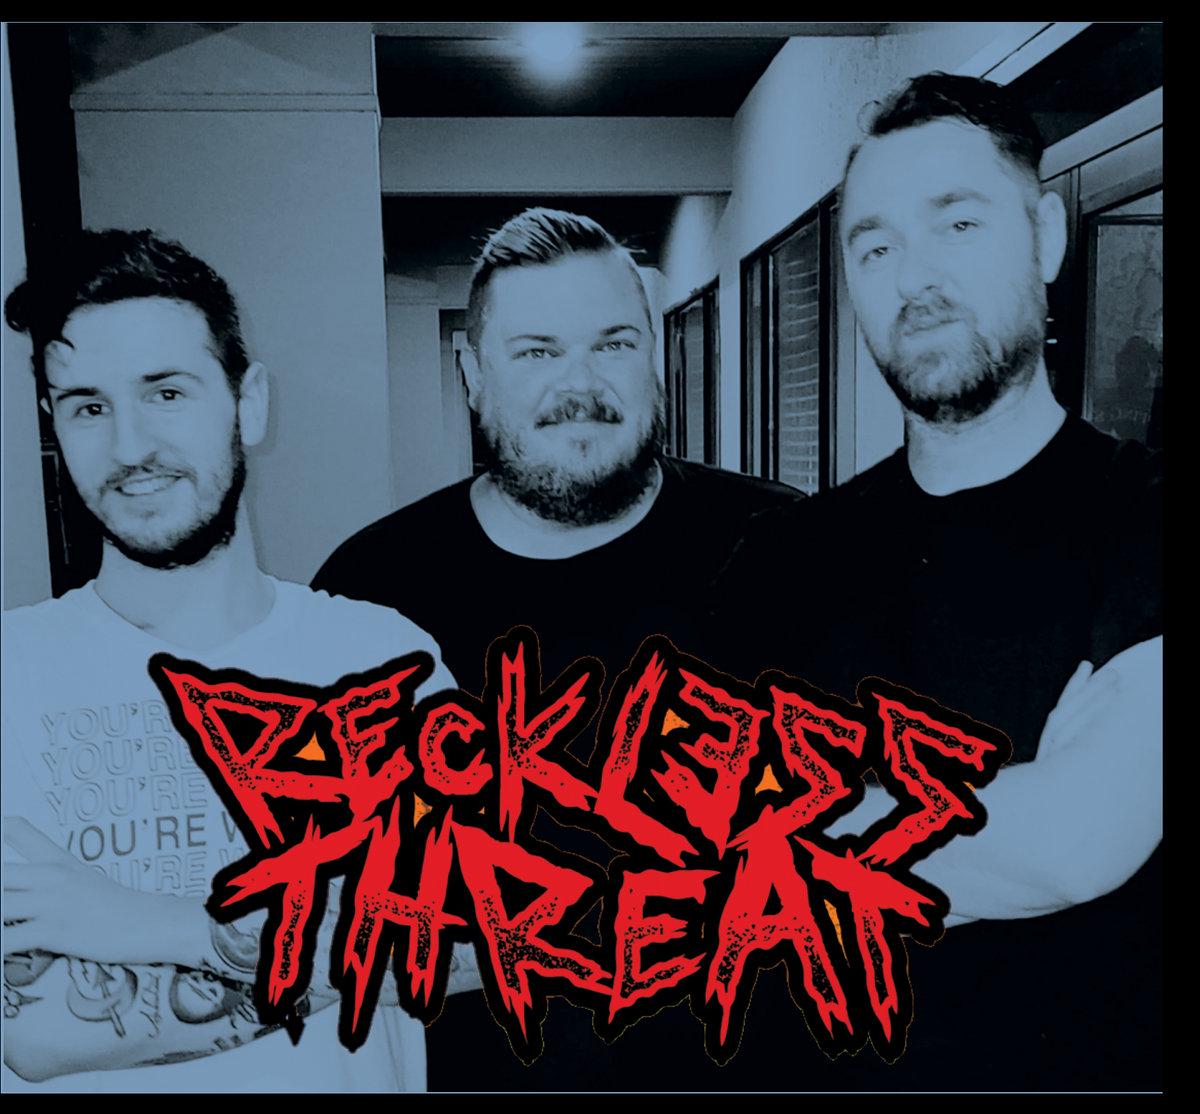 Reckless Threat at The Odd